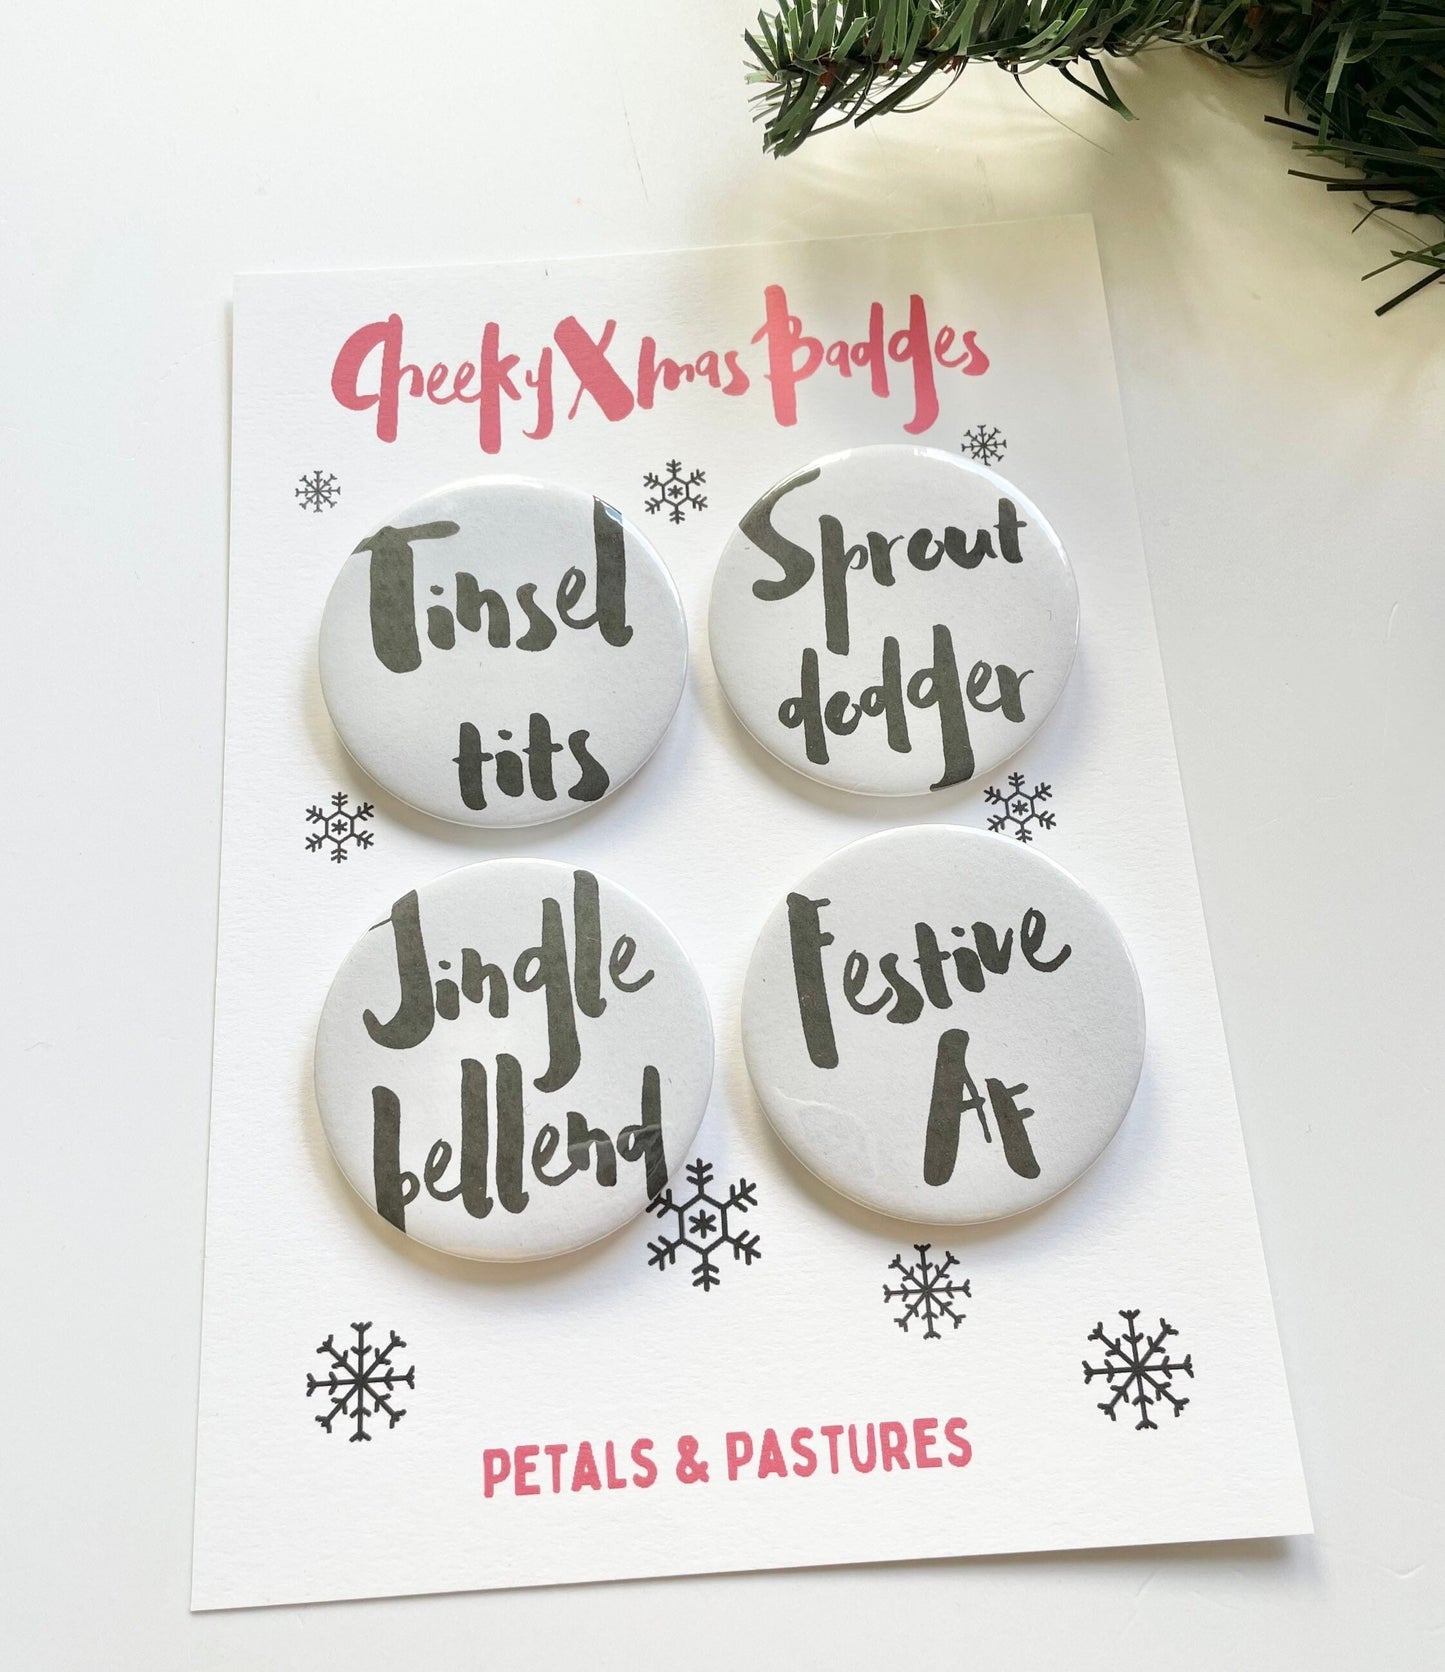 Cheeky Christmas badge pack, 58mm Xmas badges for adults, rude Christmas office party favours, diy Christmas cracker fillers,